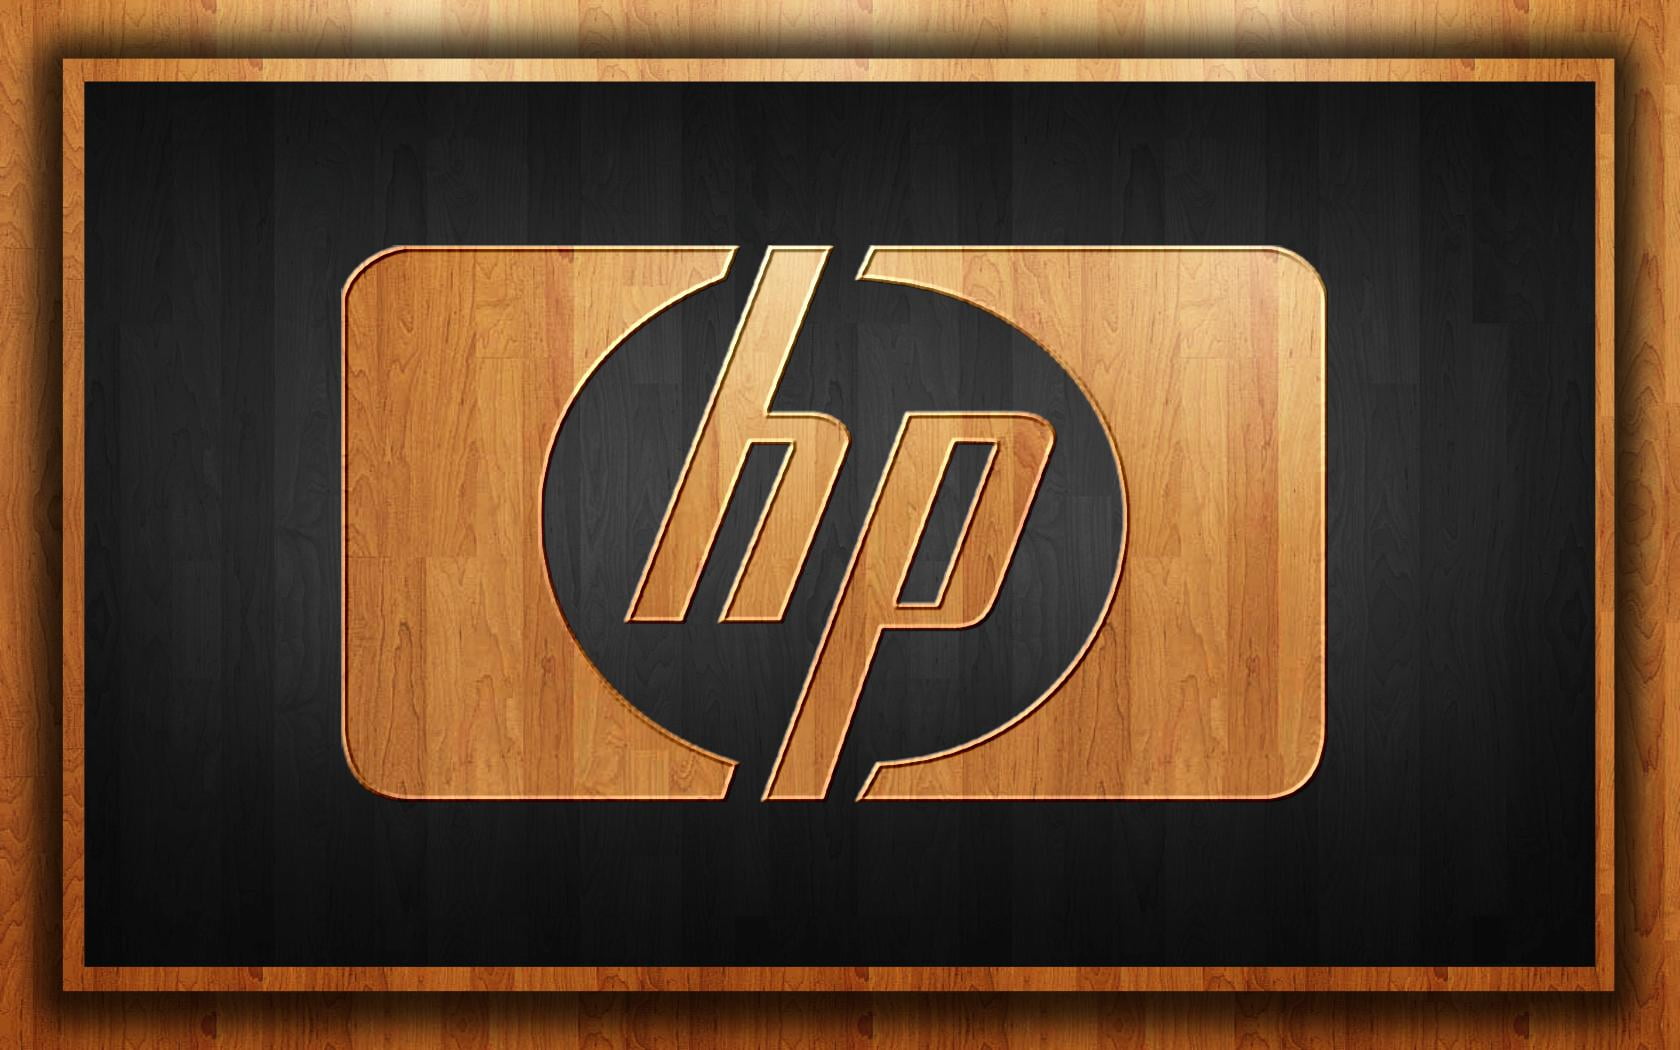 HP Wood, HP logo, Computers, communication, no people, sign, wood - material